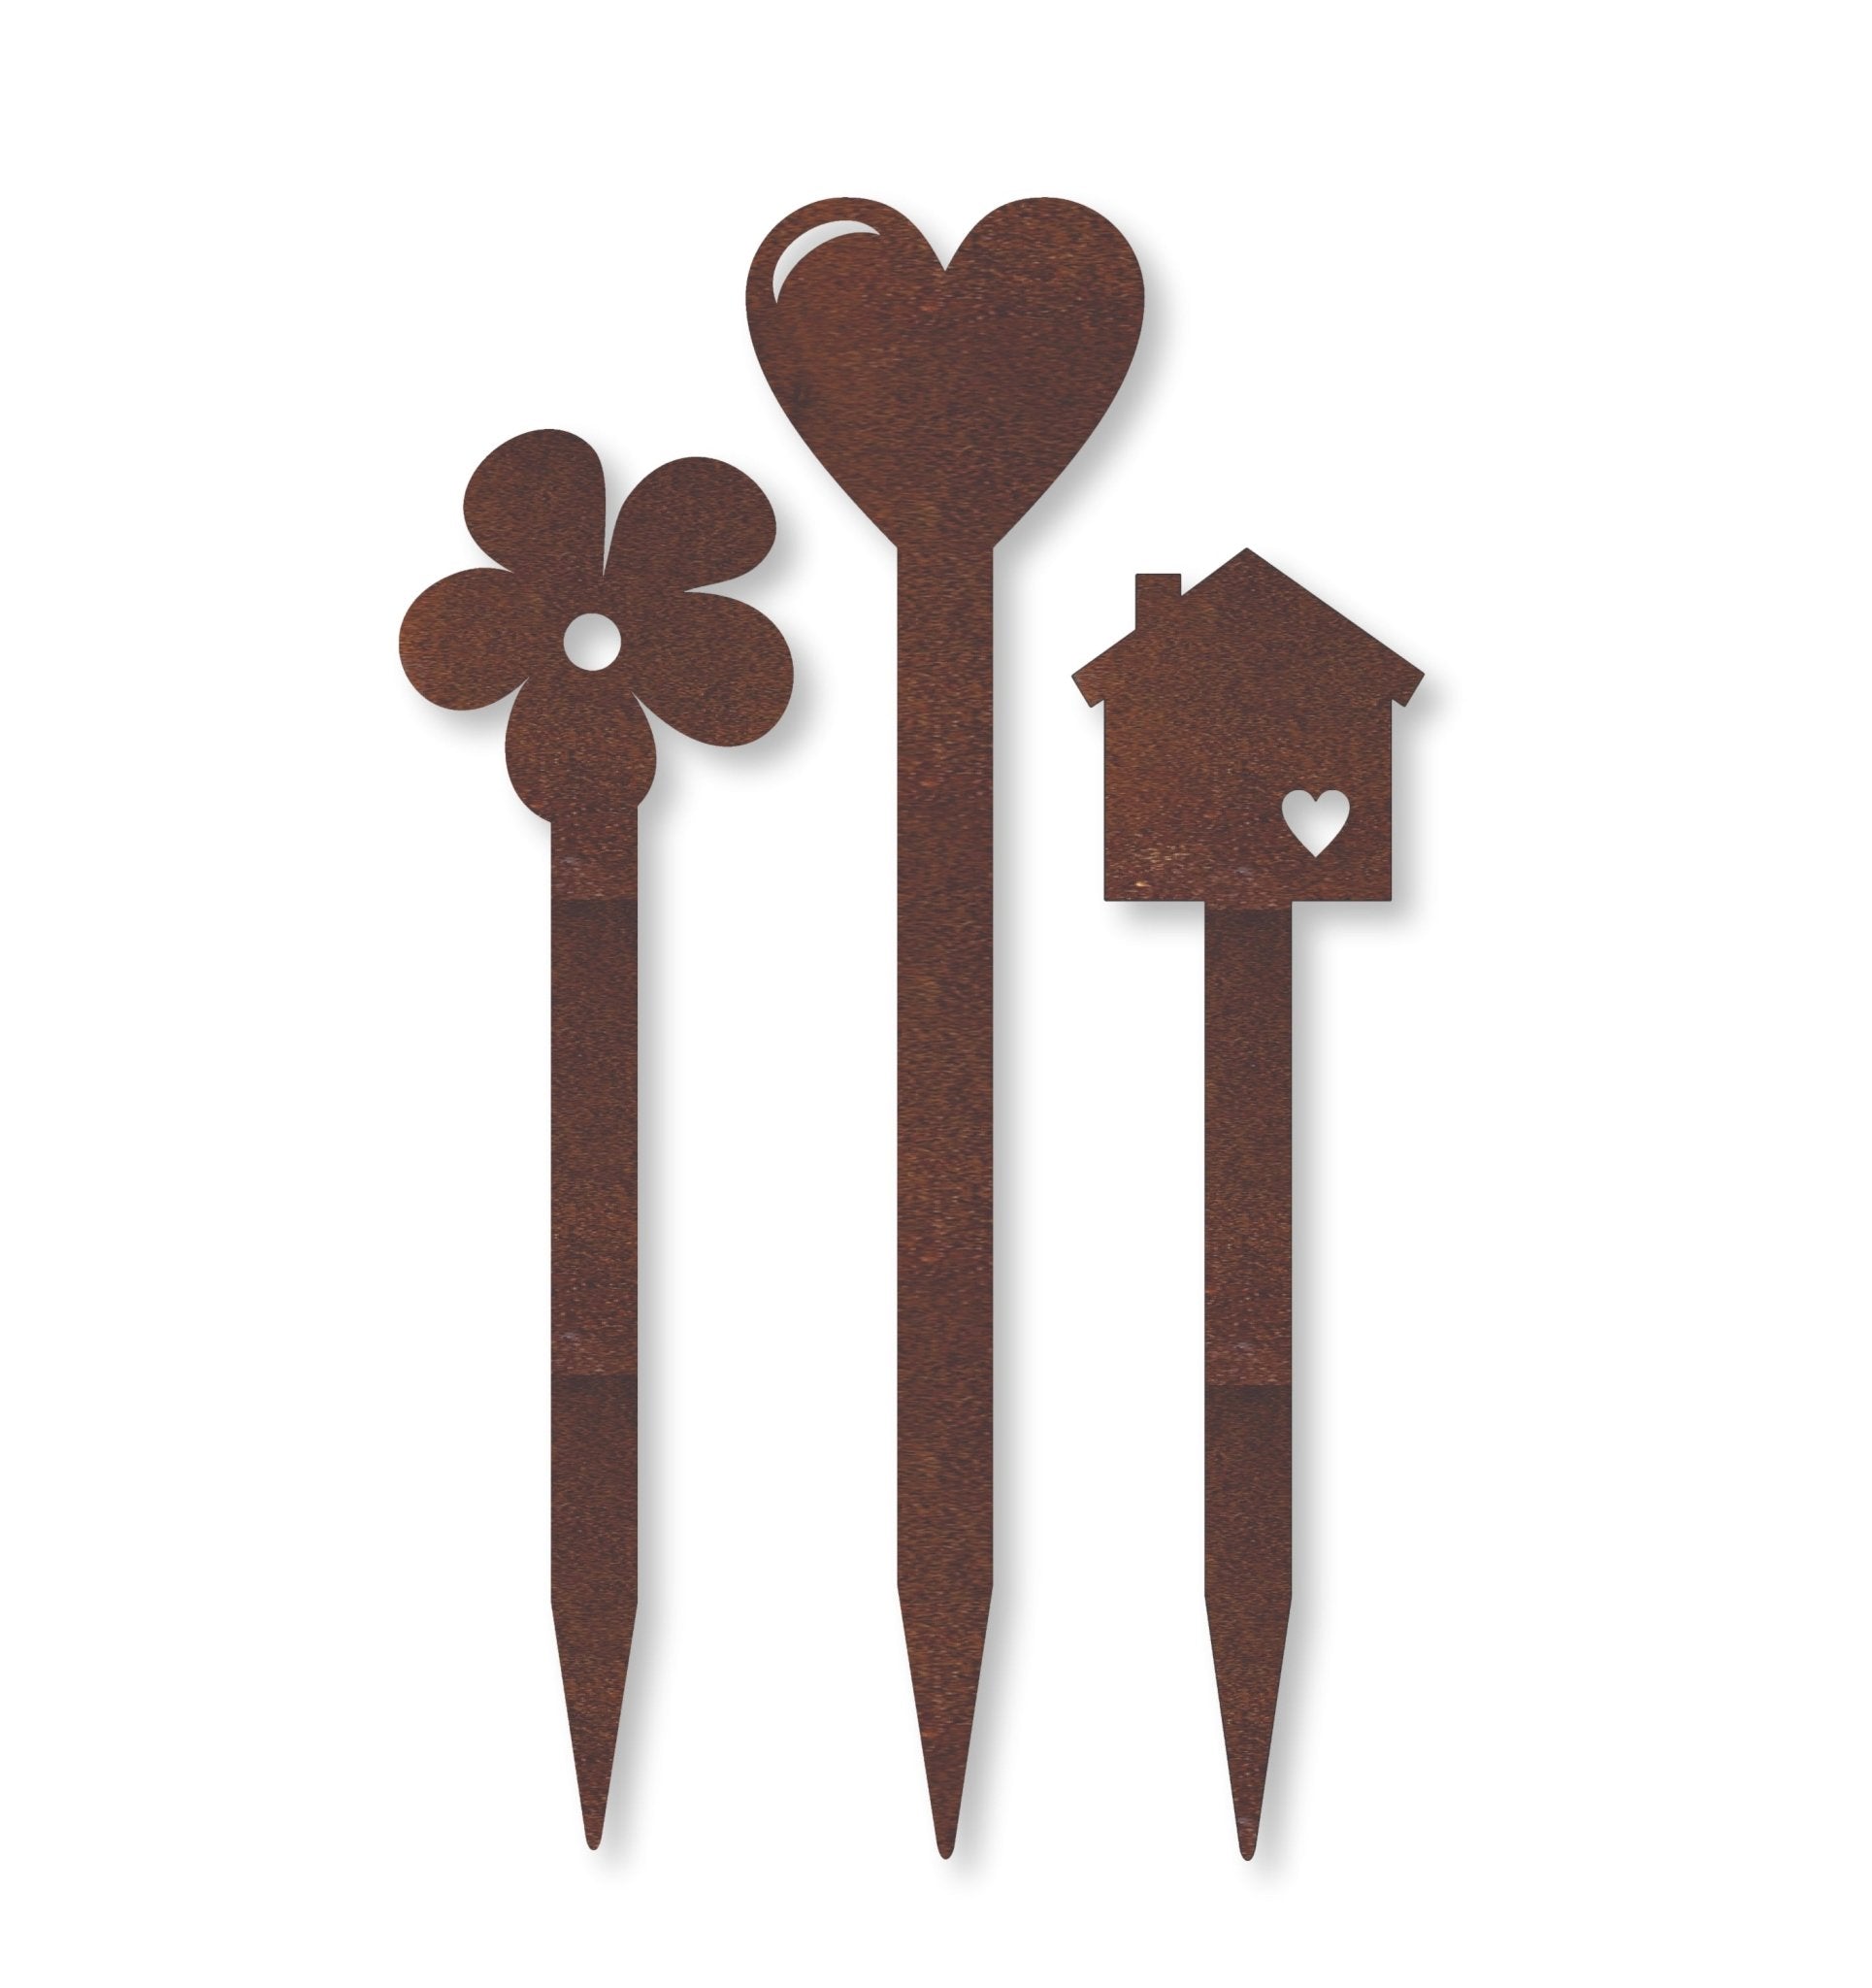 Plant decor NZ made corten steel daisy, heart and tiny house by LisaSarah Steel Designs